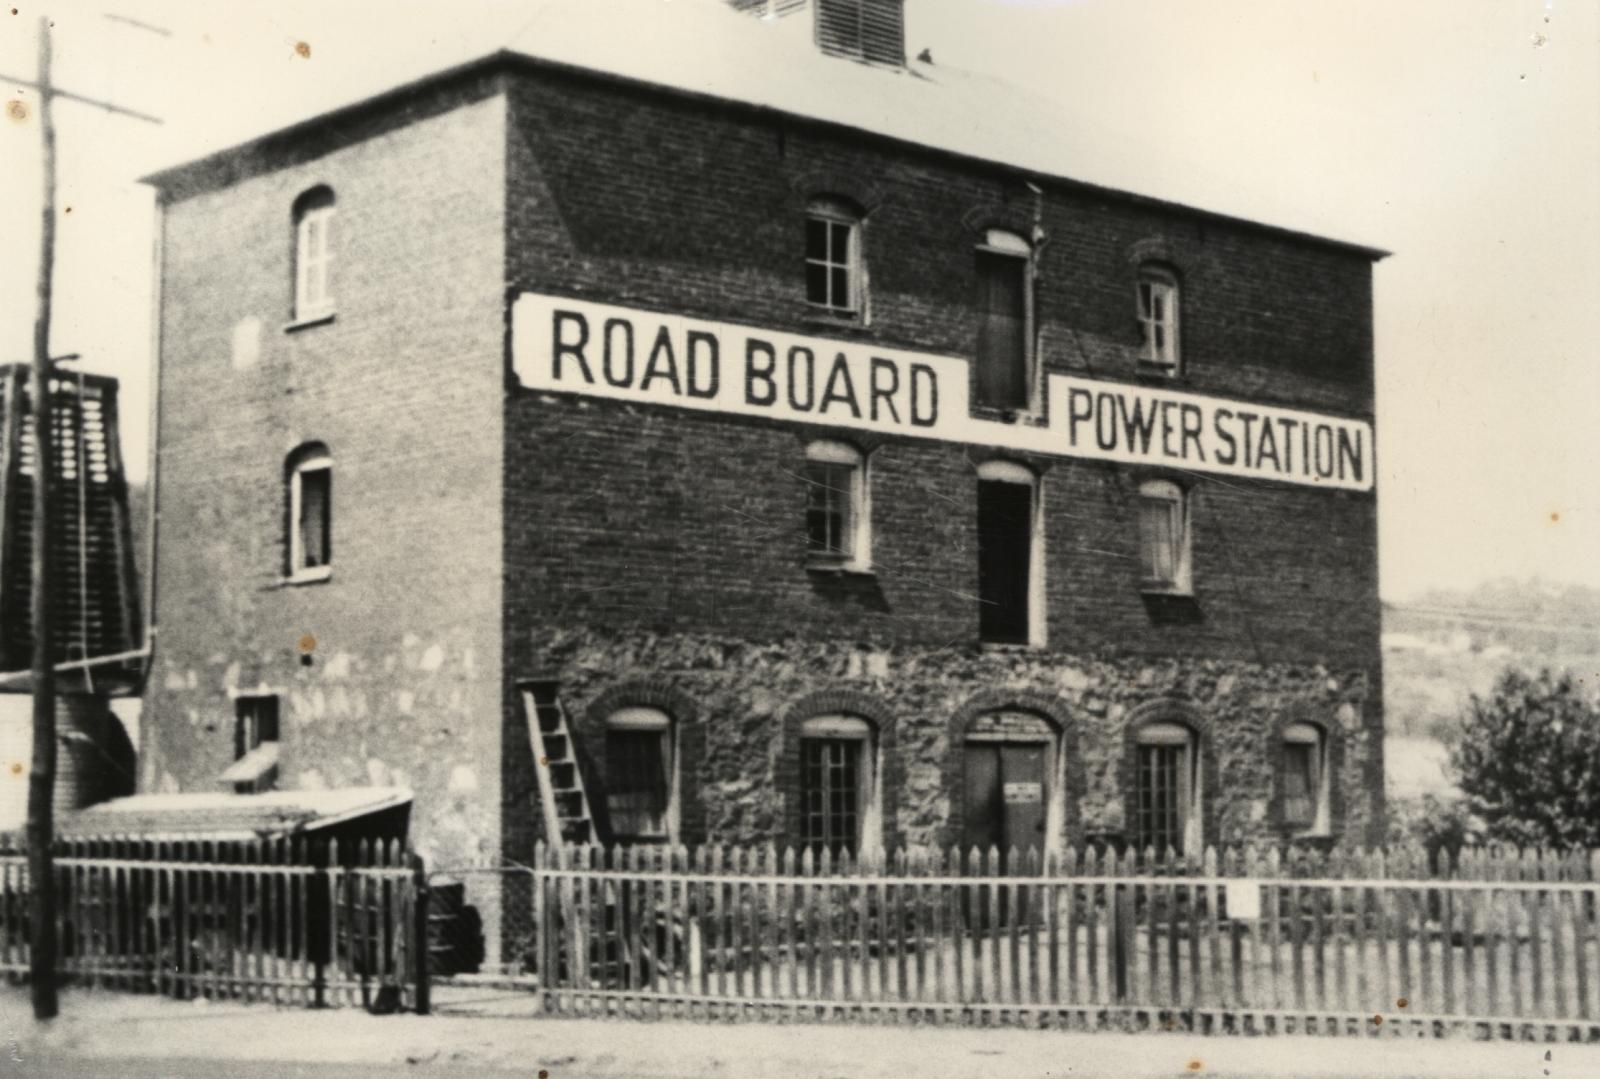 Road Board Power Station circa late 1920s